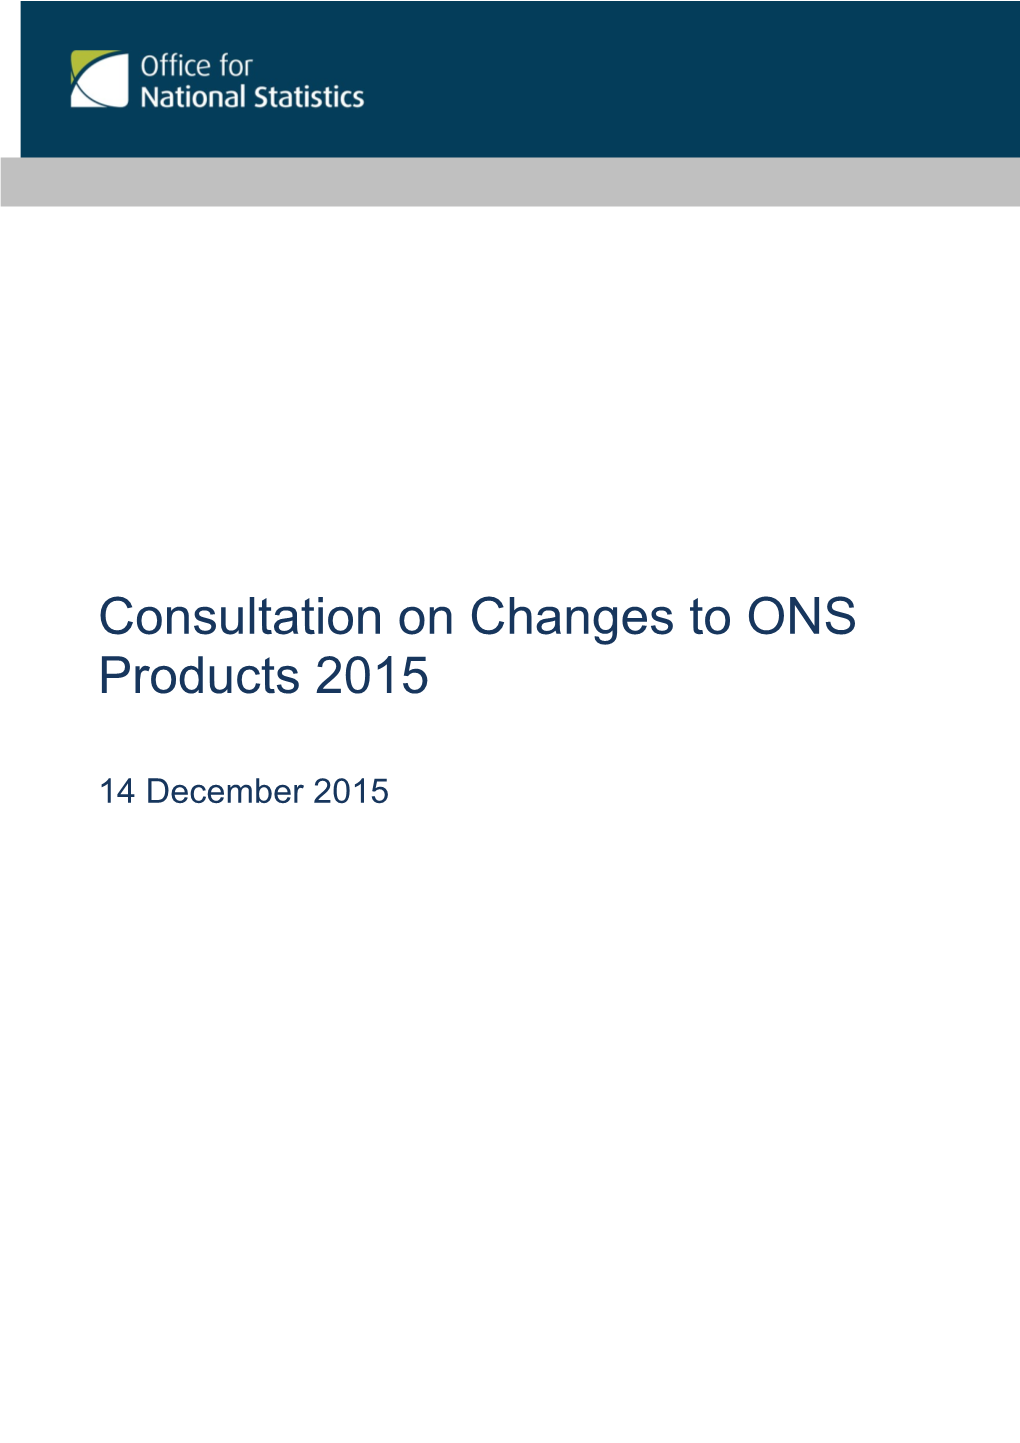 Consultation on Changes to ONS Products 2015